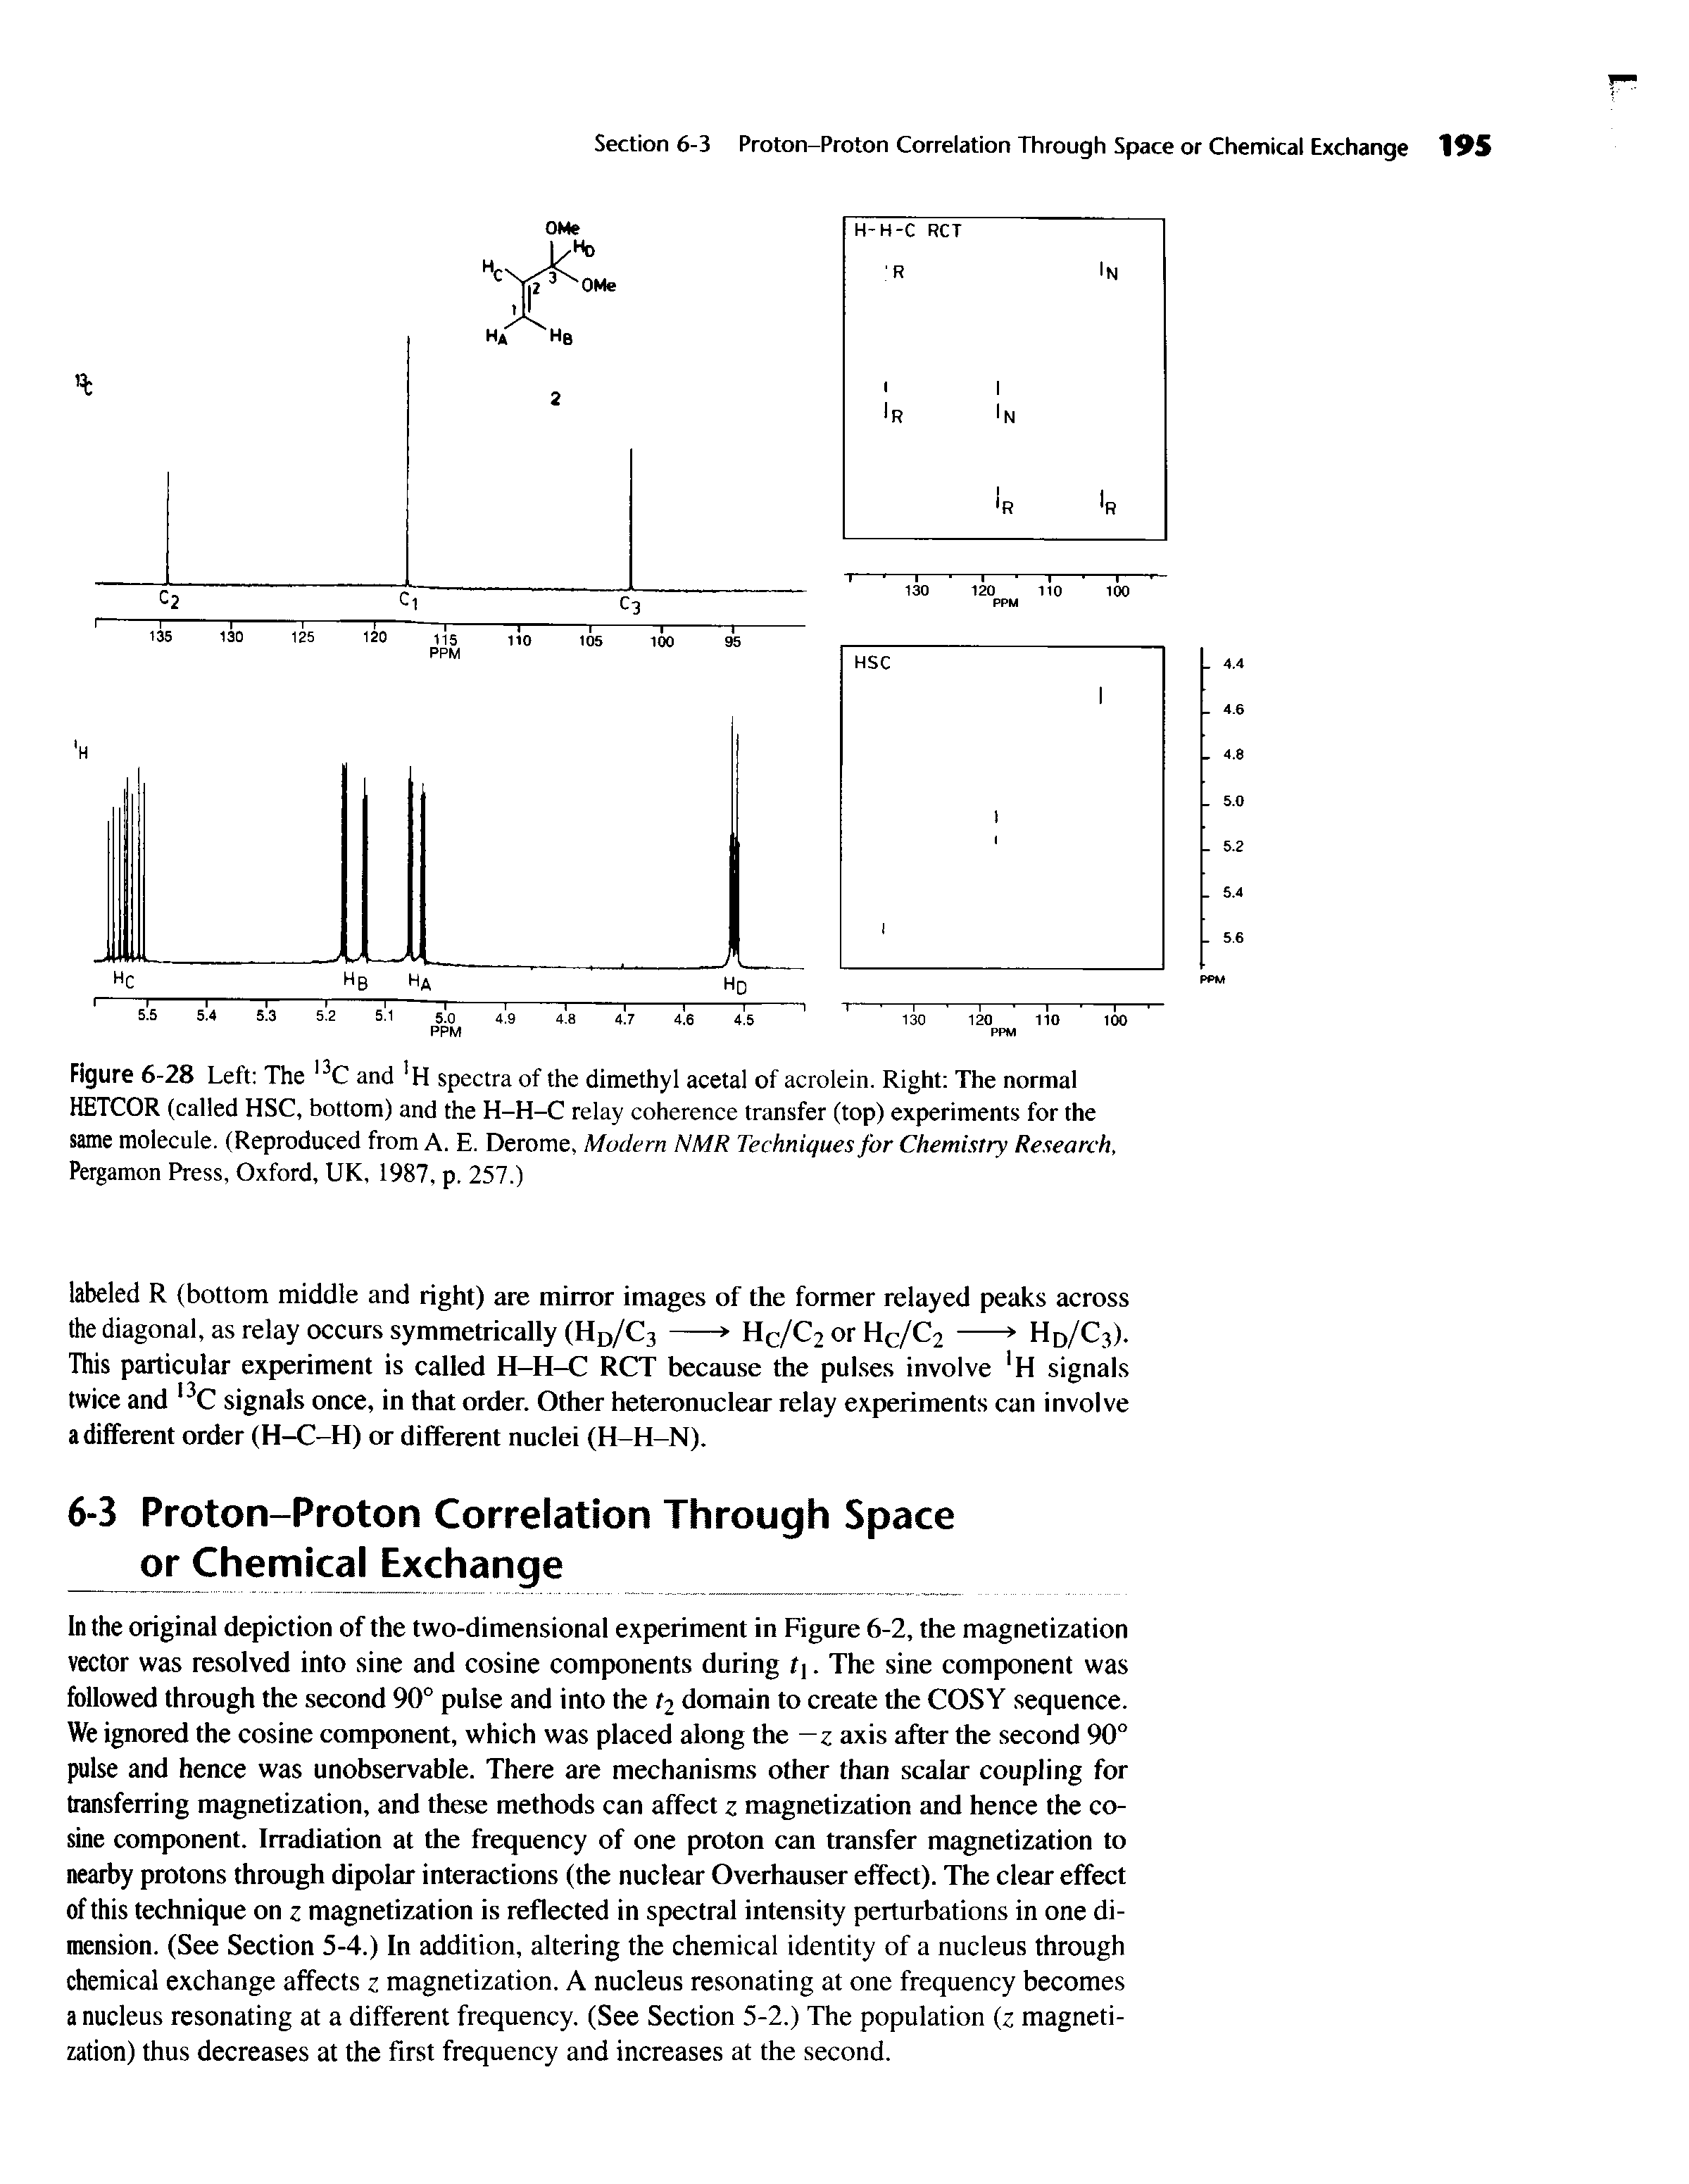 Figure 6-28 Left The and spectra of the dimethyl acetal of acrolein. Right The normal HETCOR (called HSC, bottom) and the H-H-C relay coherence transfer (top) experiments for the same molecule. (Reproduced from A. E. Derome, Modern NMR Techniques for Chemistry Research, Pergamon Press, Oxford, UK, 1987, p. 257.)...